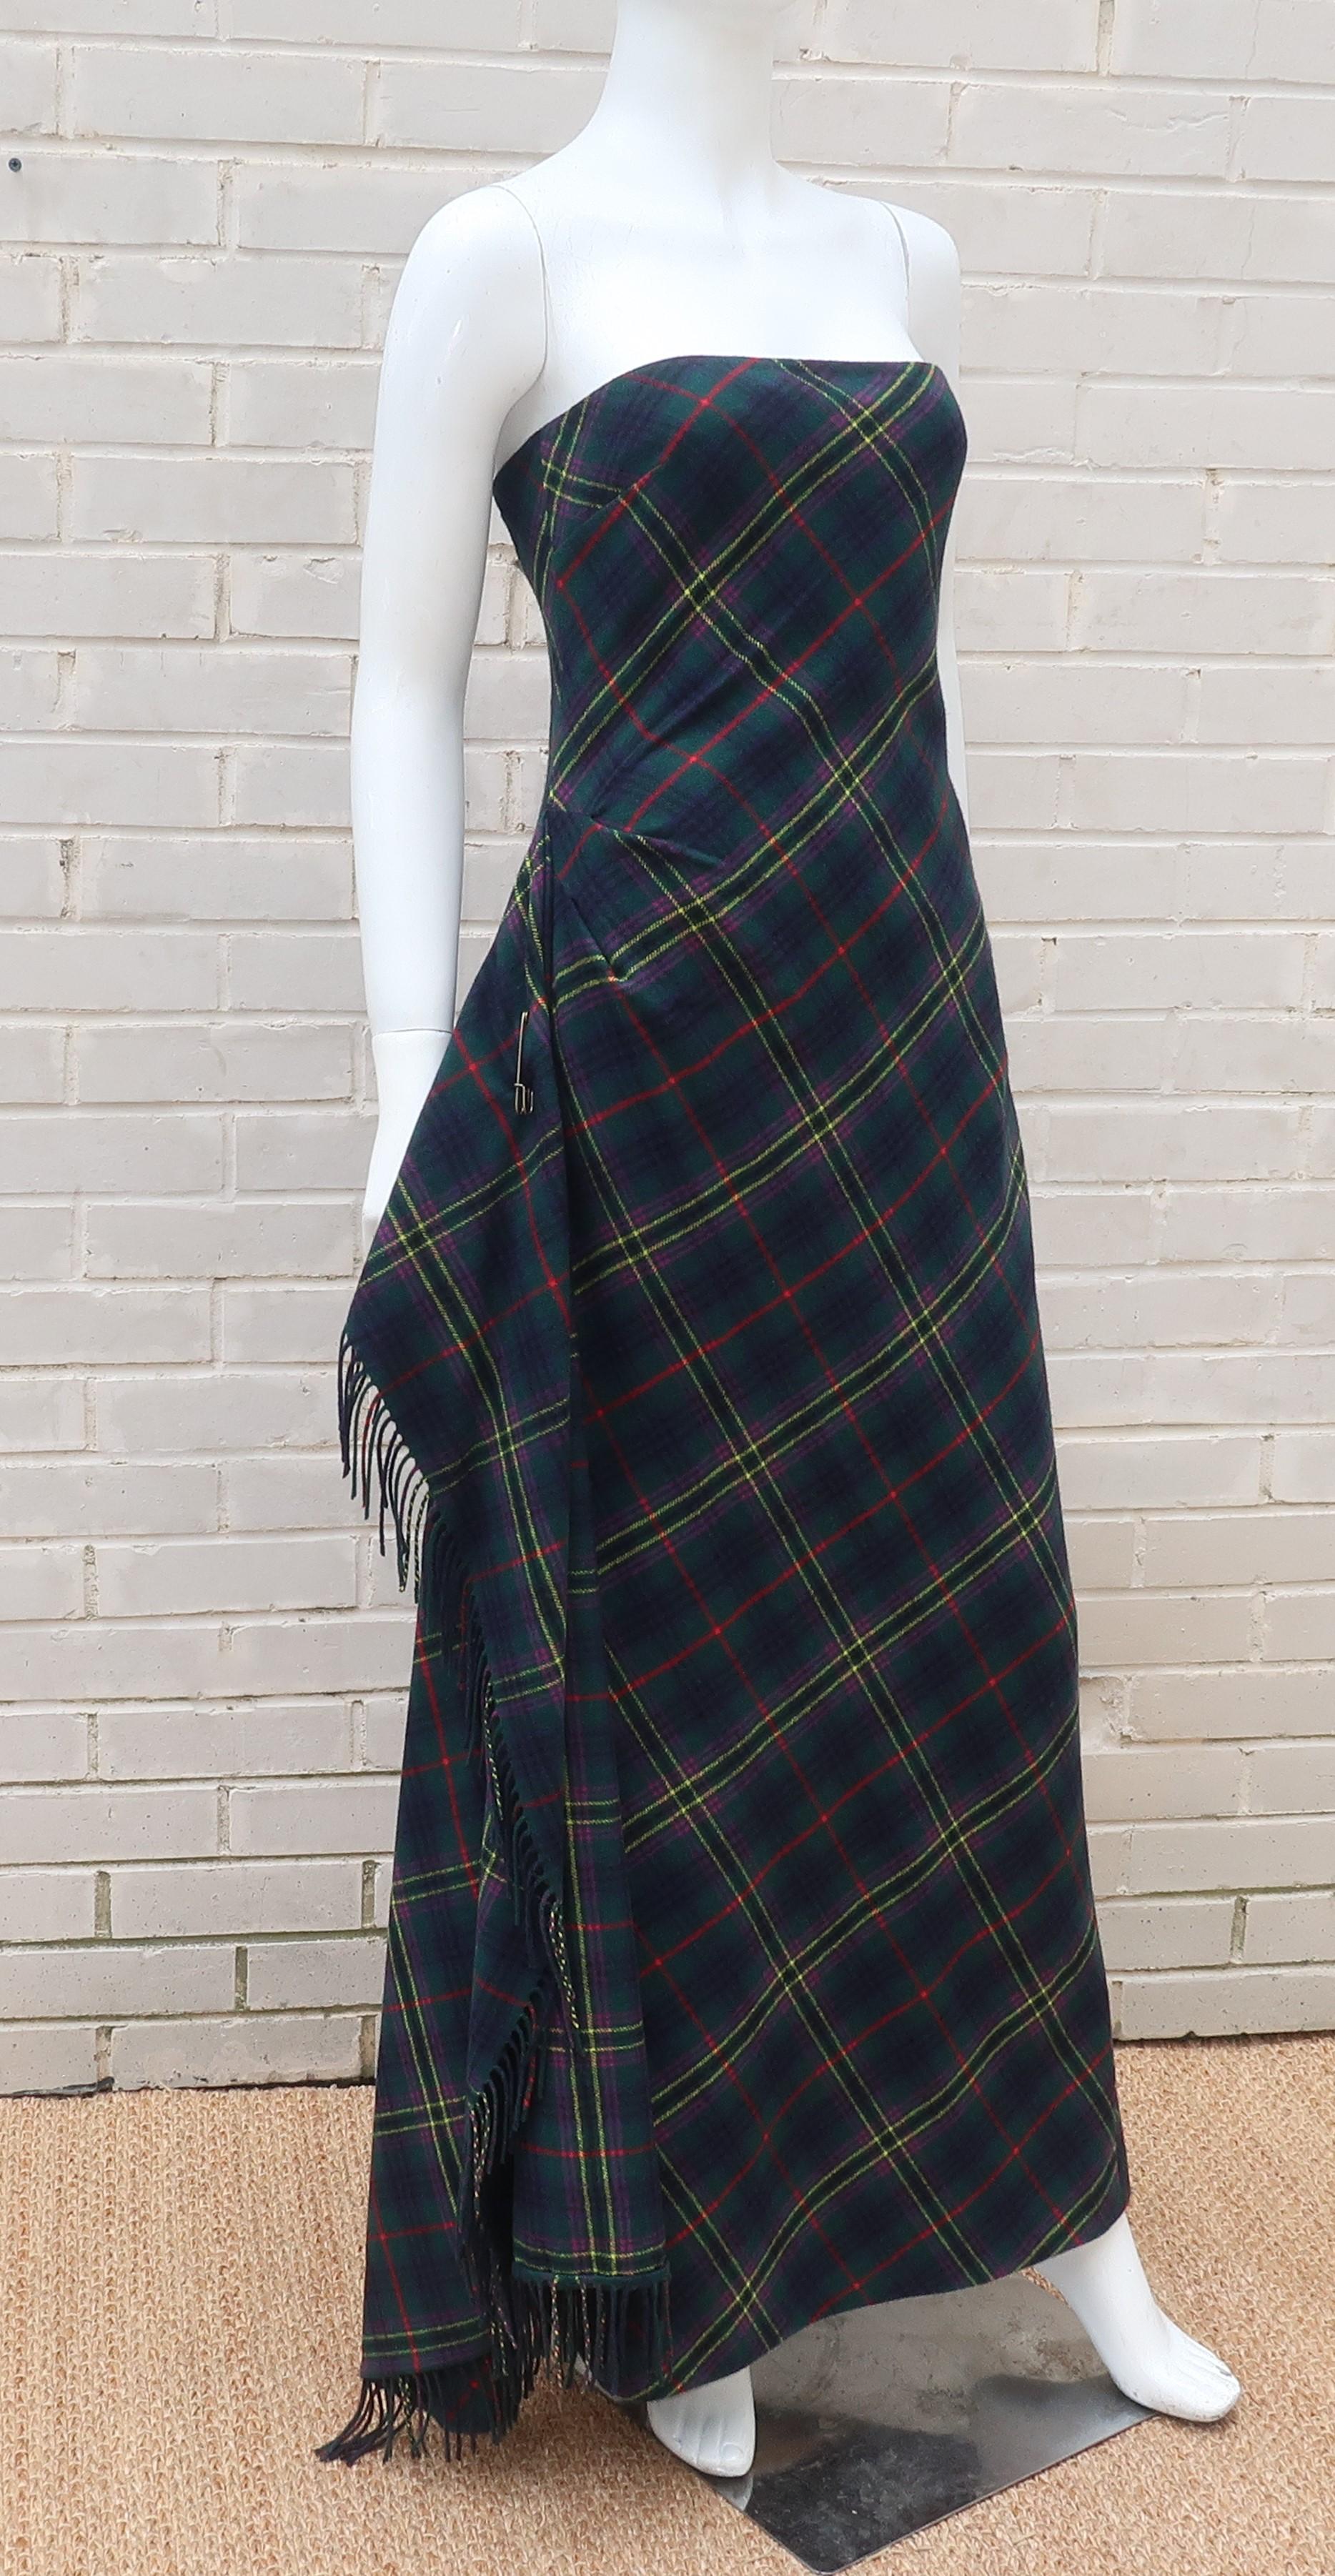 Ralph Lauren creates all-American good looks and a nod to a Scottish past with this tartan plaid strapless evening dress.  The cashmere and lambswool blended fabric is much like a cozy fringed blanket that has been wrapped, ruched, boned and pinned